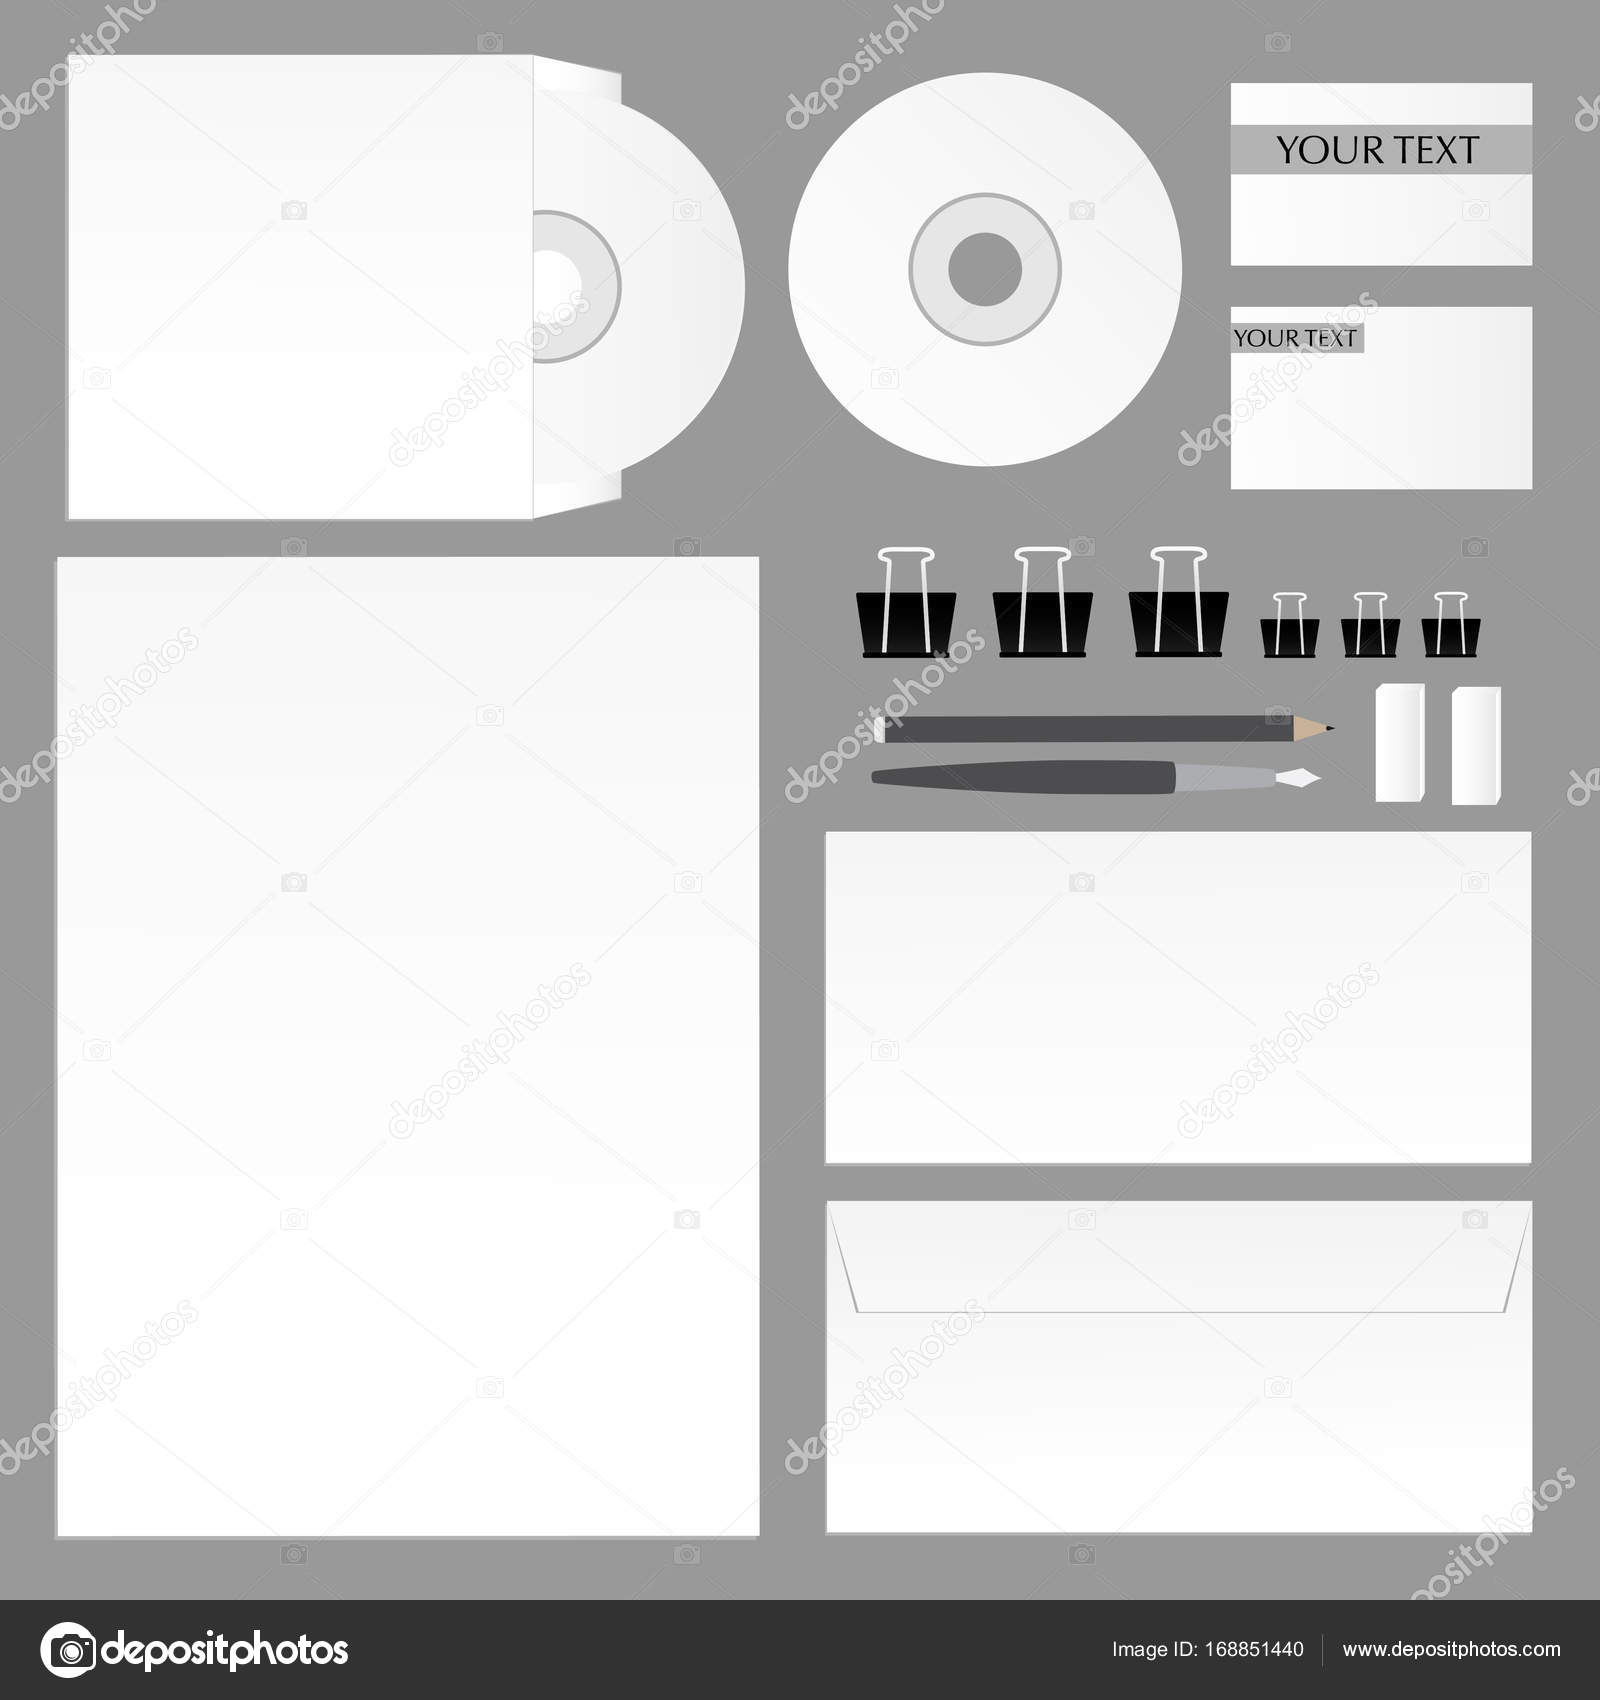 Download Corporate Branding Mockup Template Isolated On Grey Background Stock Vector C Oney Why 168851440 PSD Mockup Templates